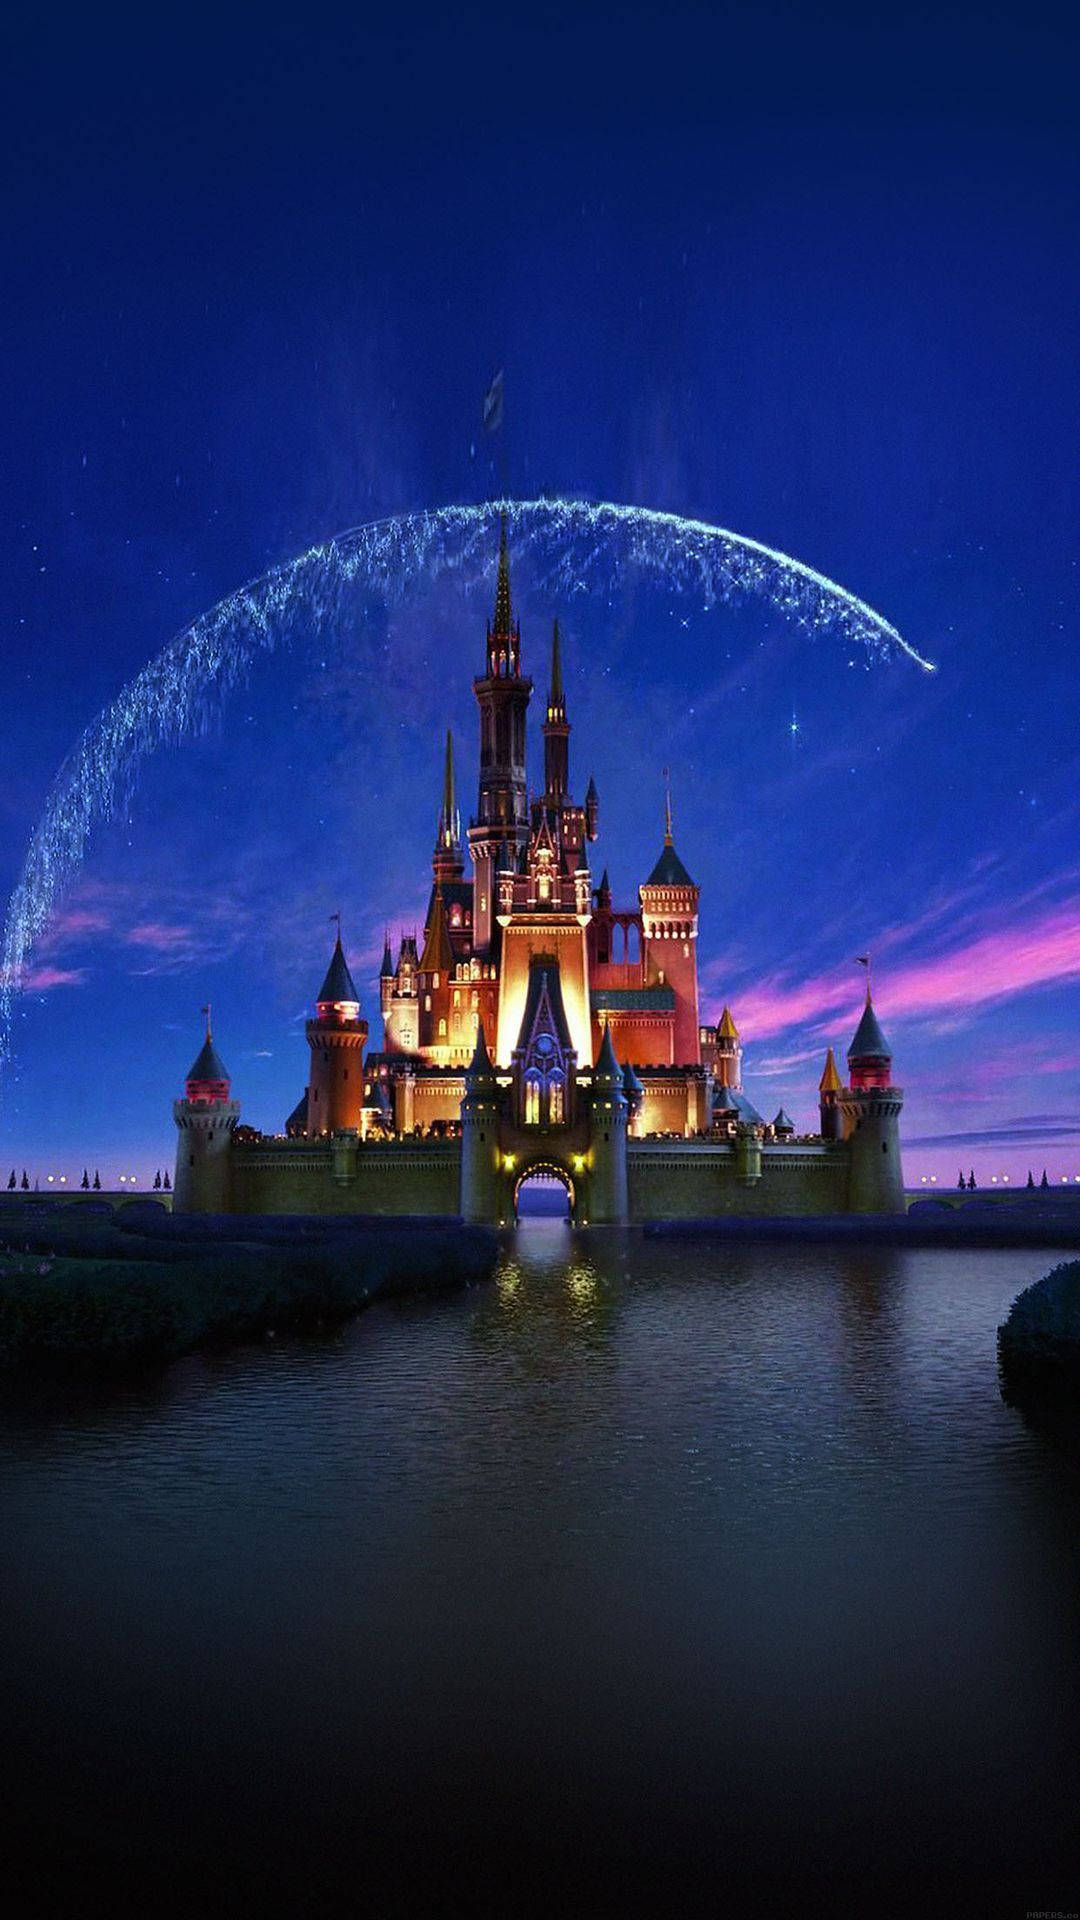 Make A Wish On A Shooting Star At Disney Castle Wallpaper